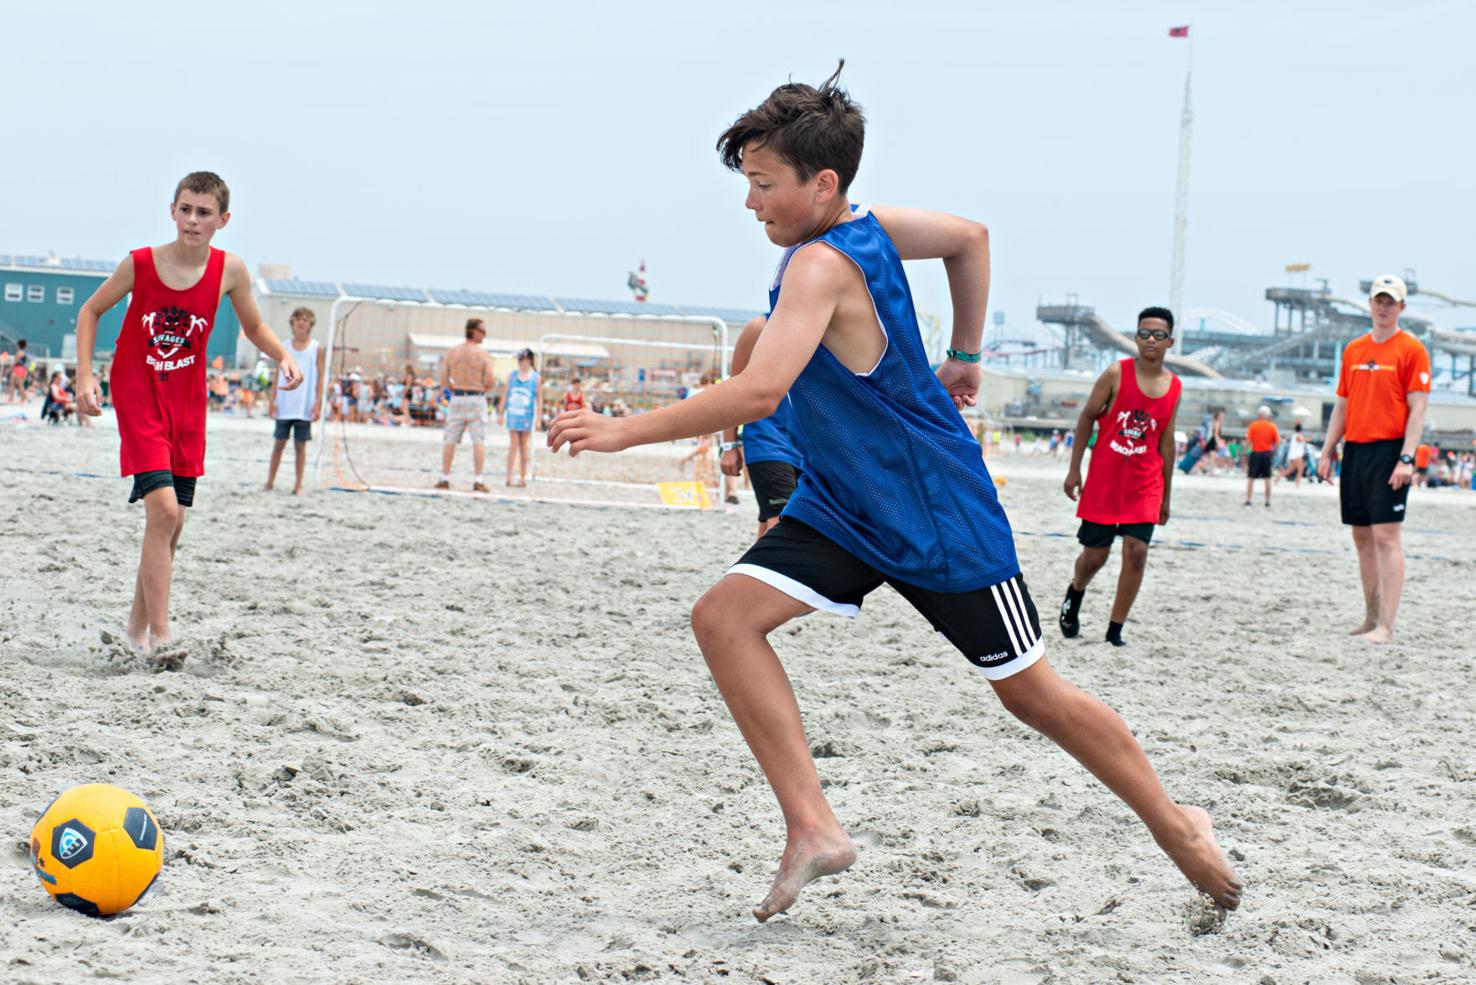 Hundreds flock to Wildwood to compete in Beach Blast Soccer Soccer